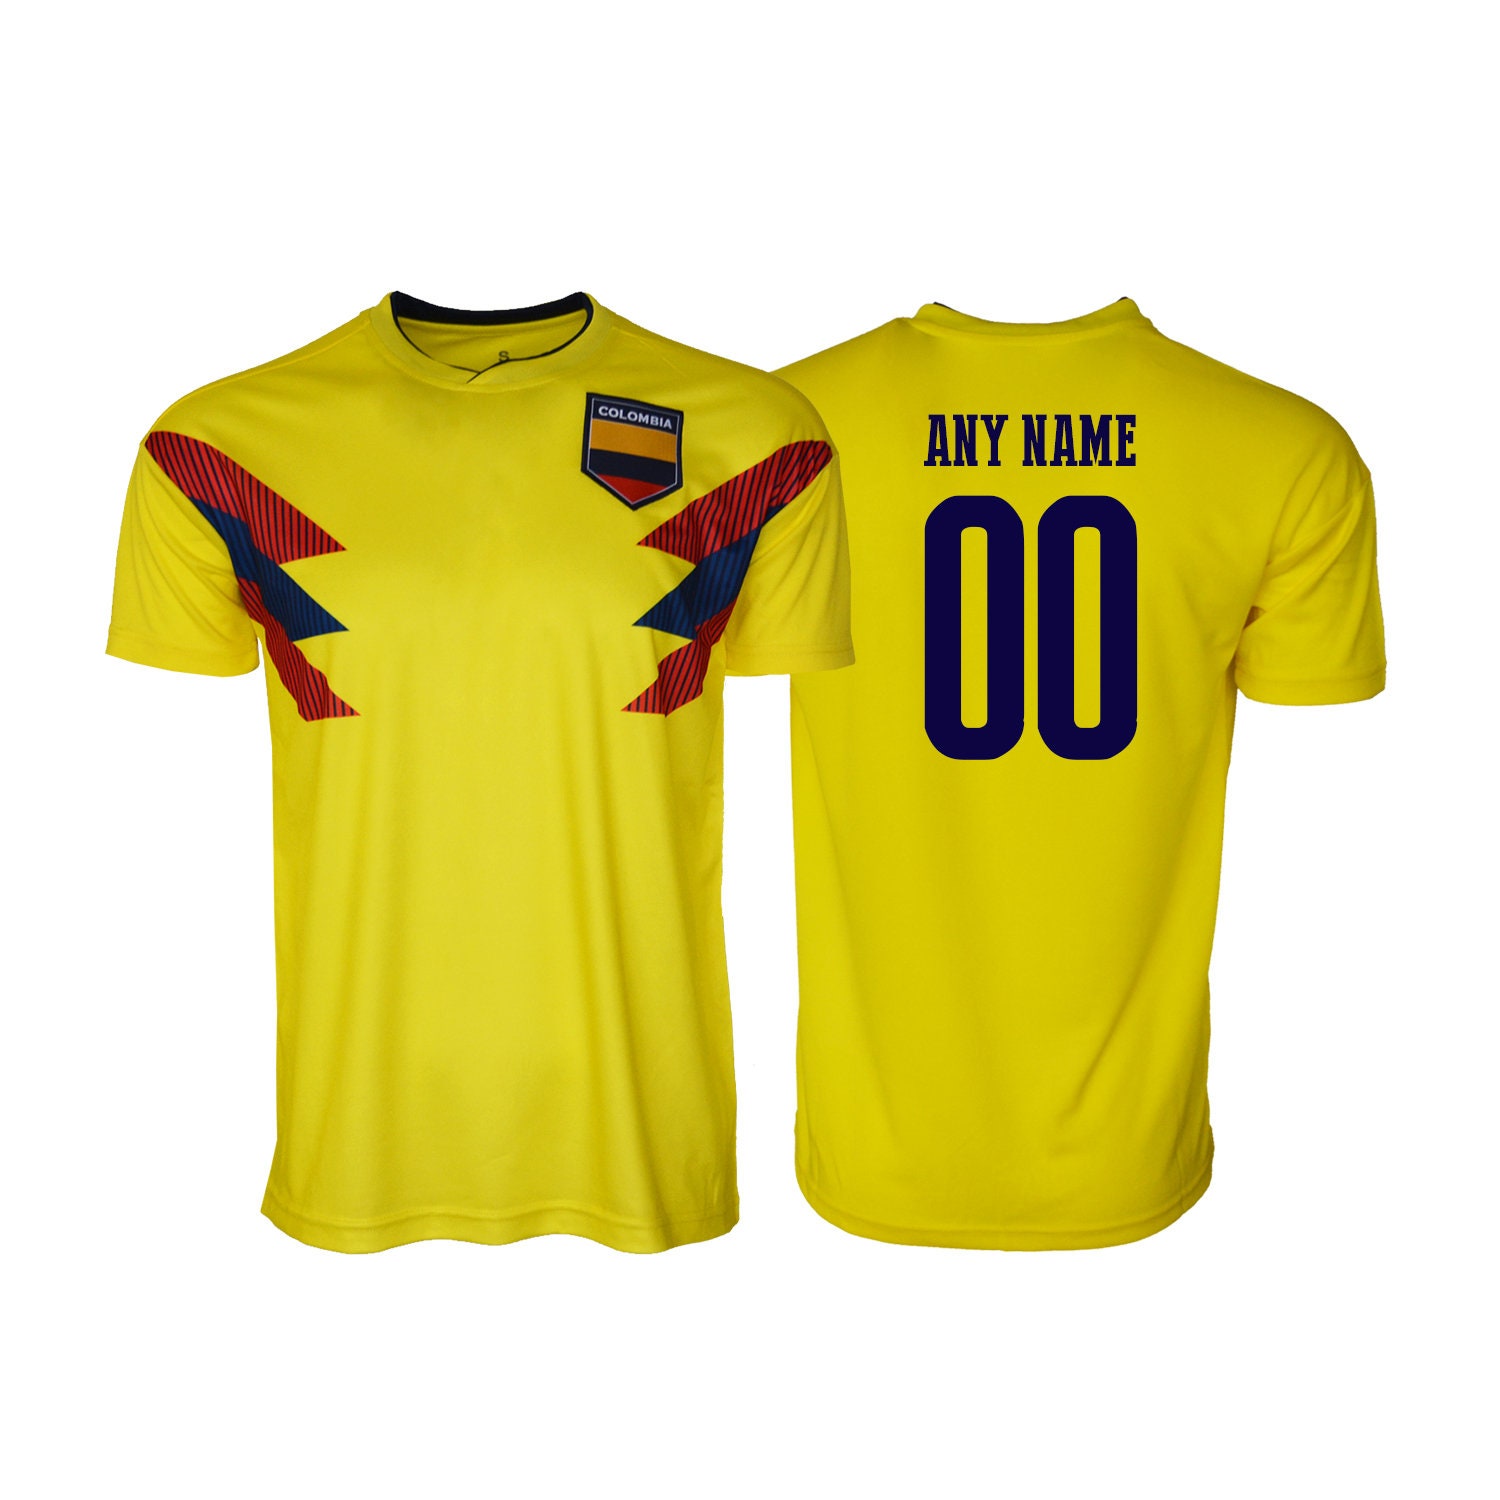 Colombia Football Team Soccer Retro Jersey Los Cafeteros Kids T